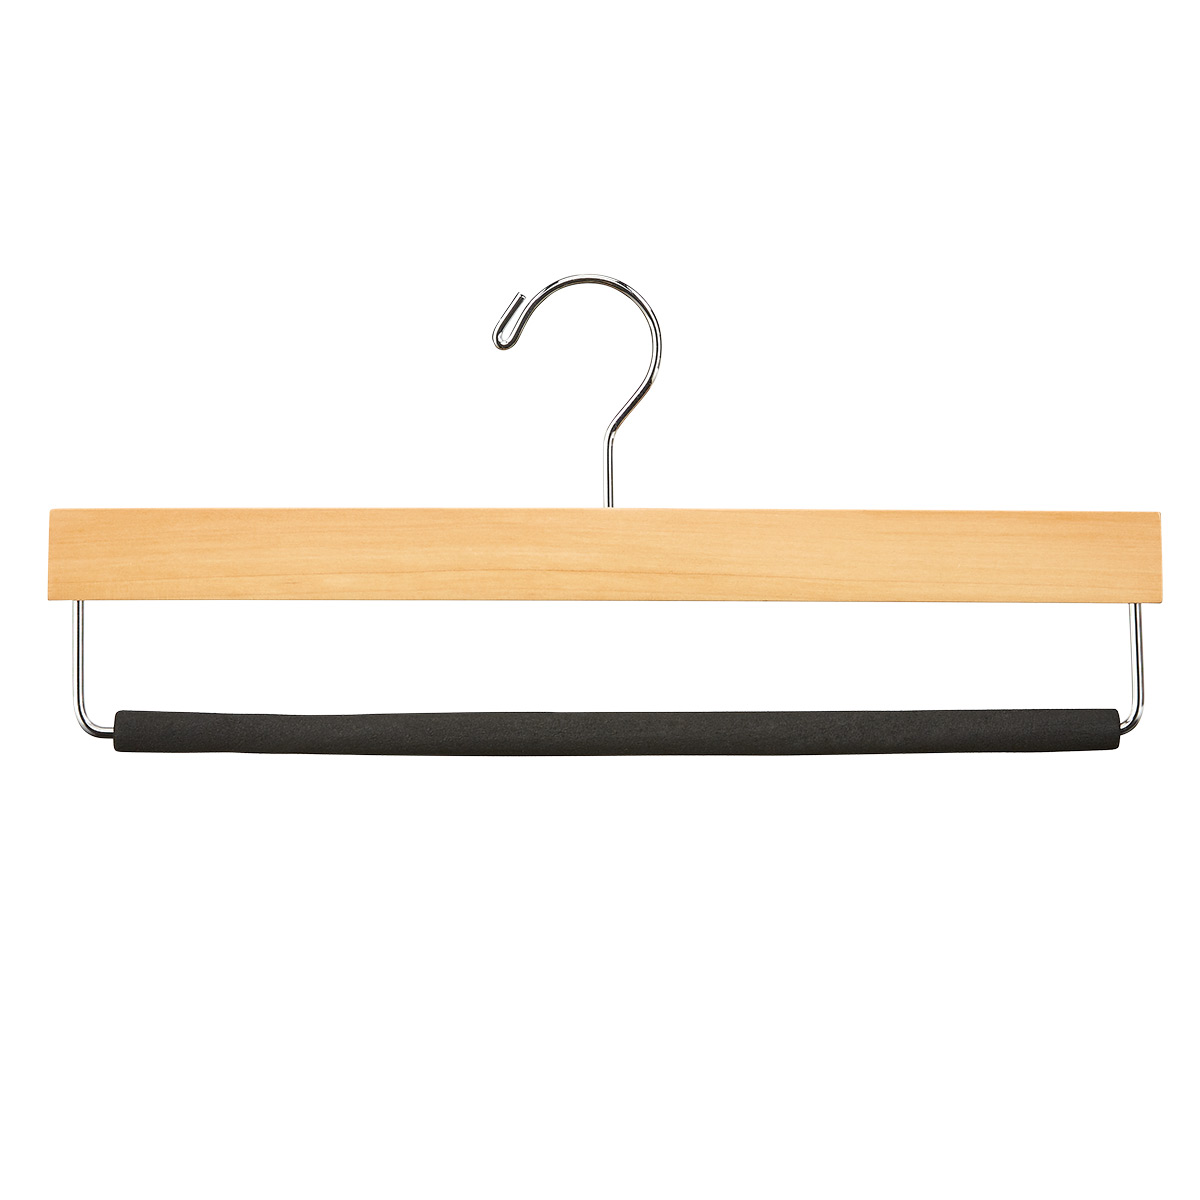 https://www.containerstore.com/catalogimages/409520/10083709_wooden_trouser_hanger_with_.jpg